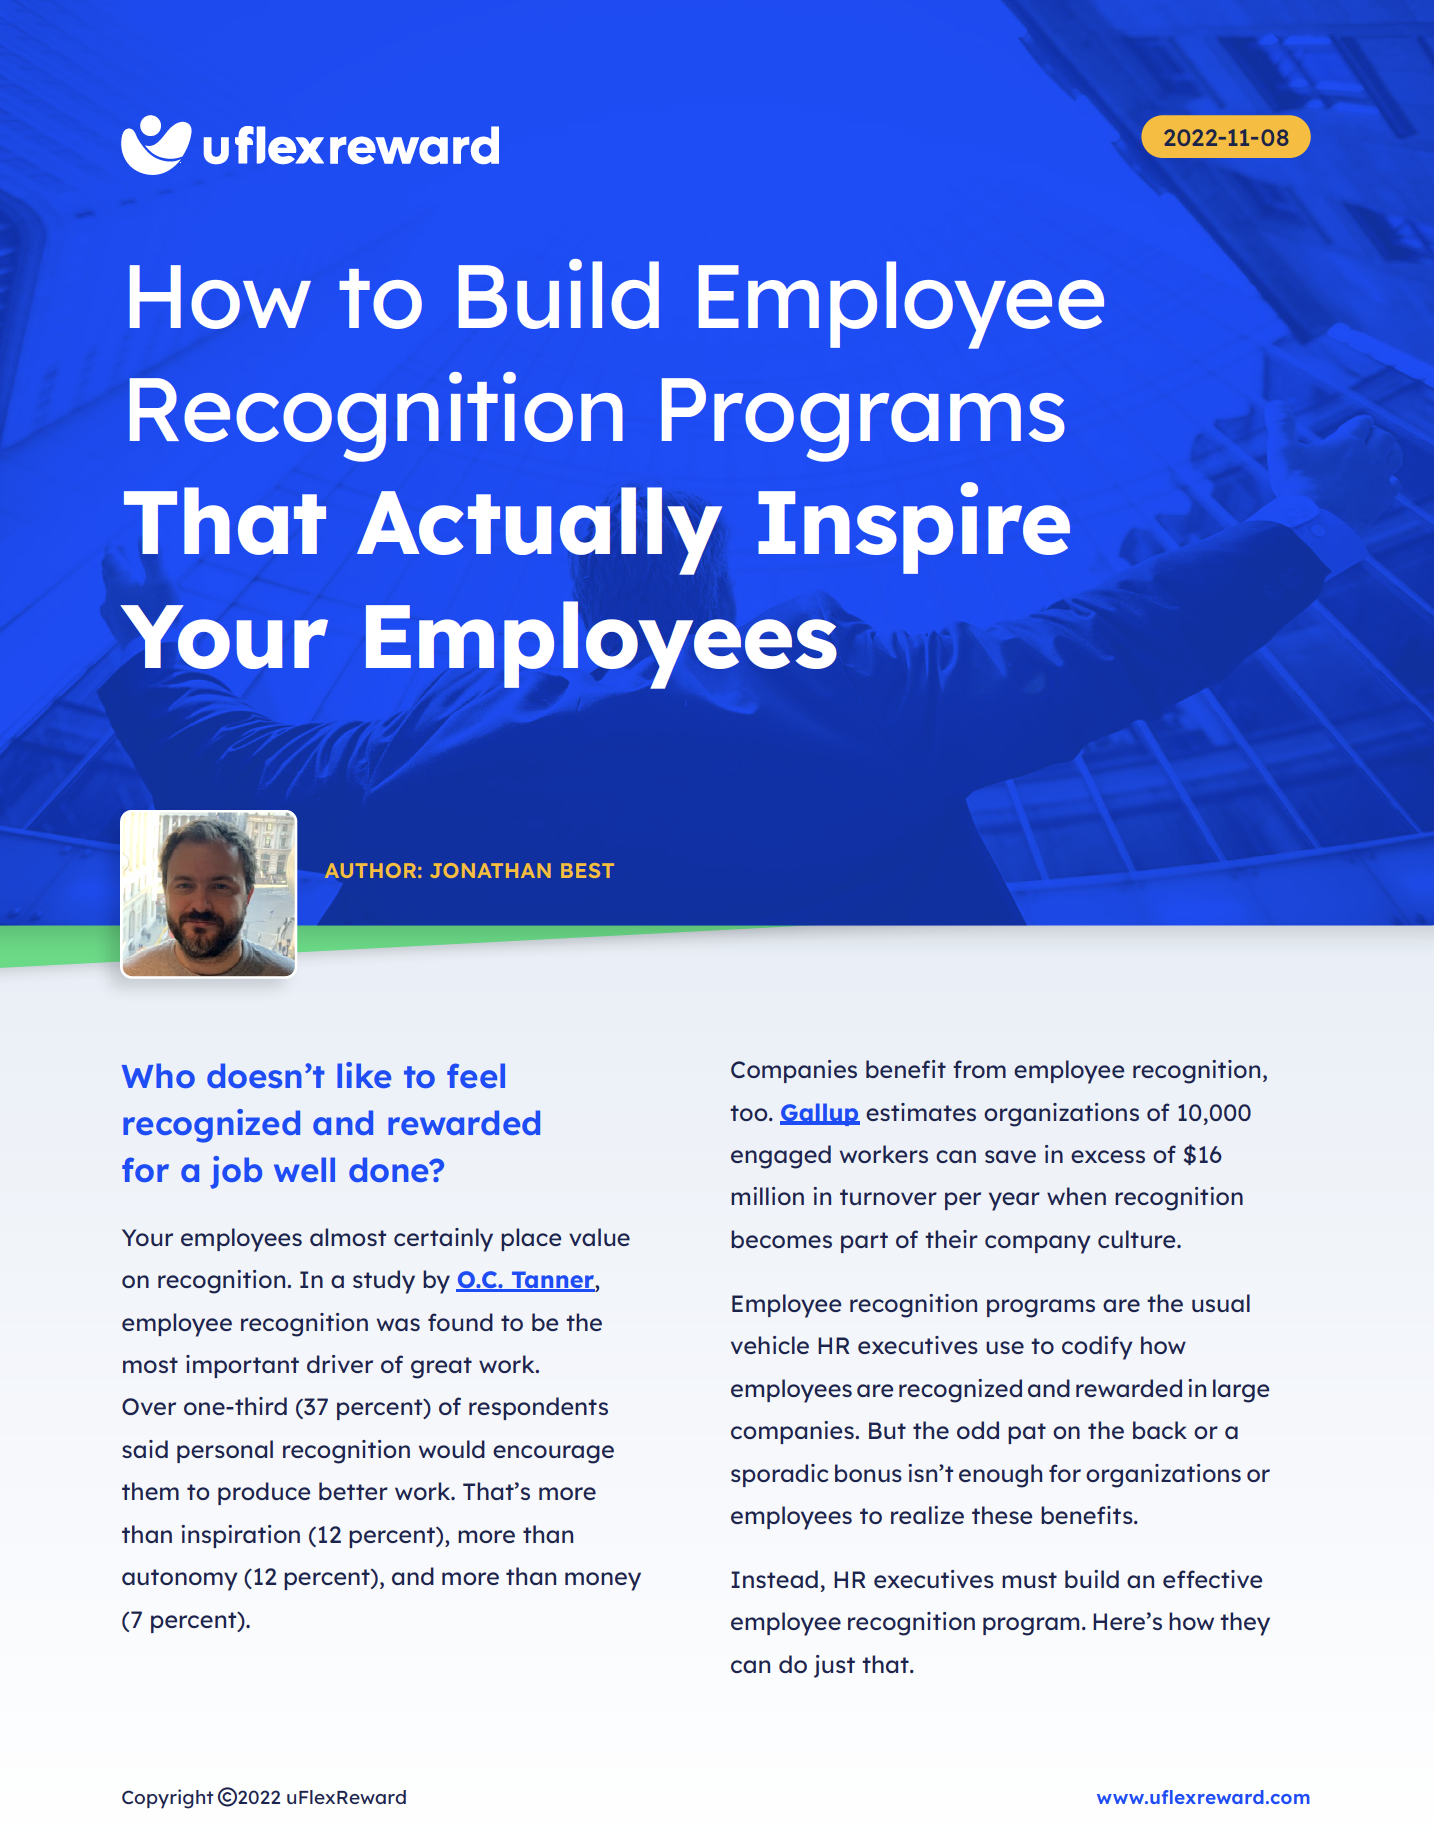 How to Build Employee Recognition Programs That Actually Inspire Your Employees